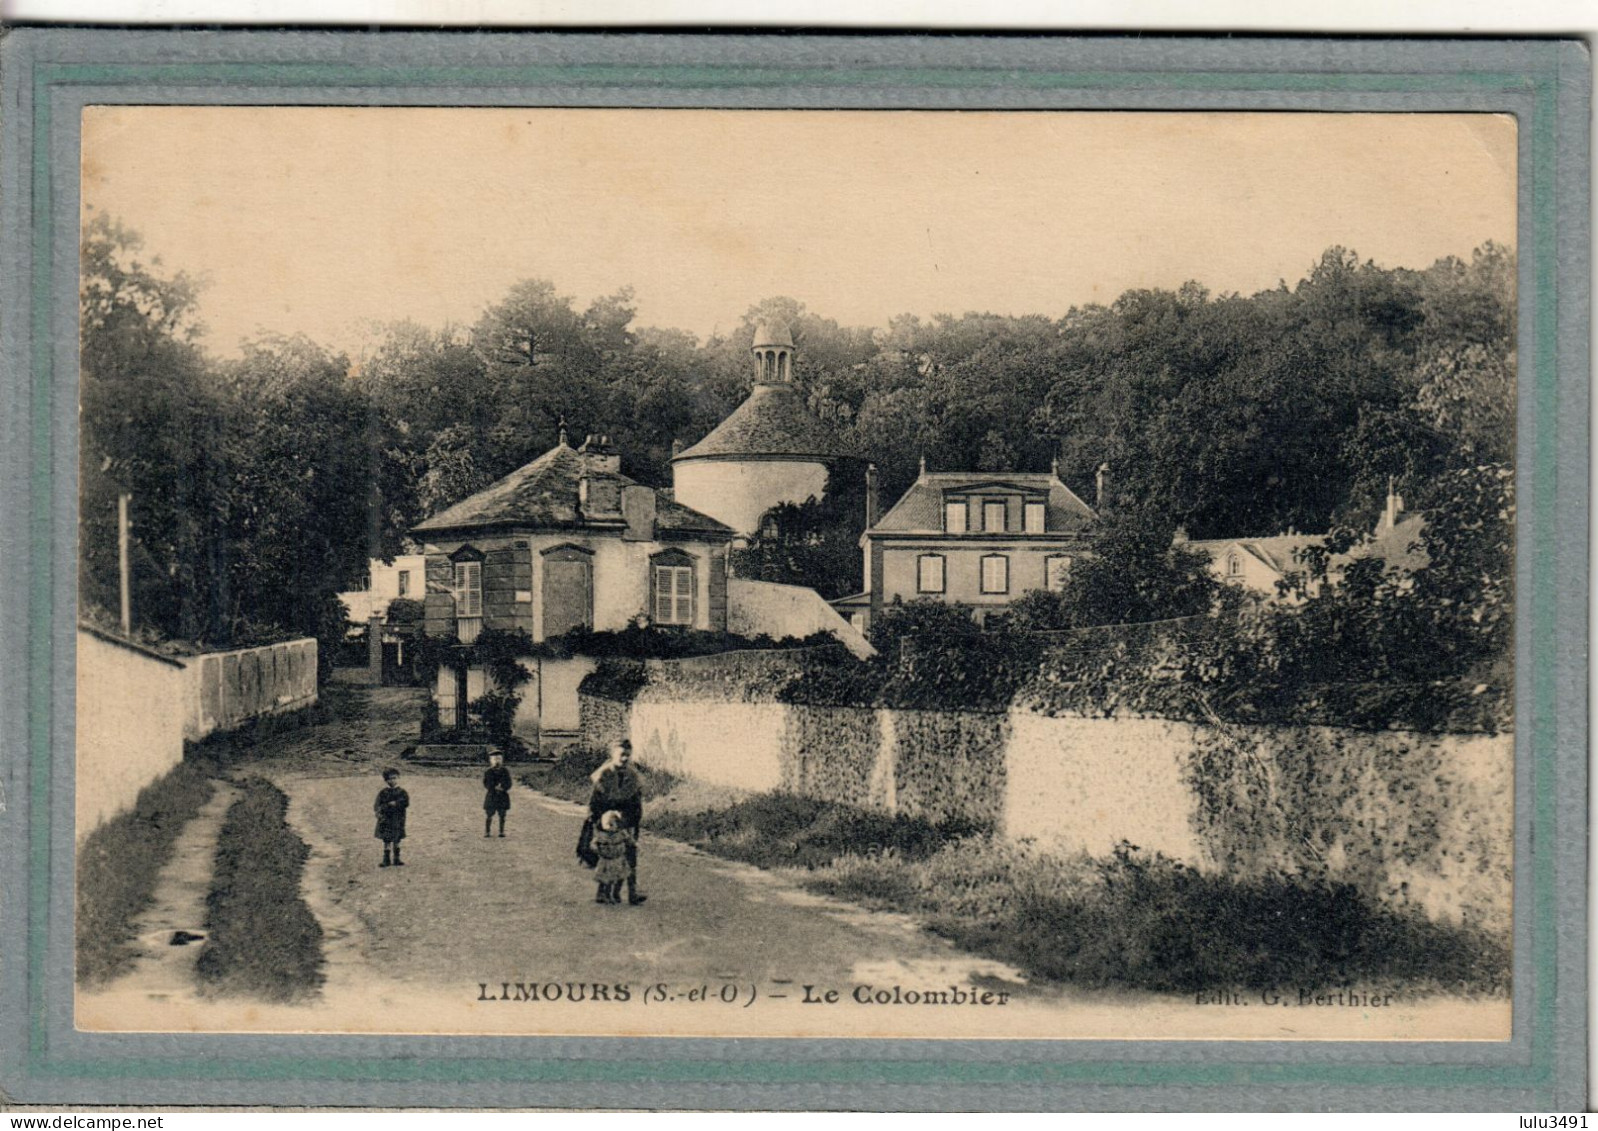 CPA (91) LIMOURS - Thème: Colombier, Colombophilie, Pigeonnier - 1920 - Limours